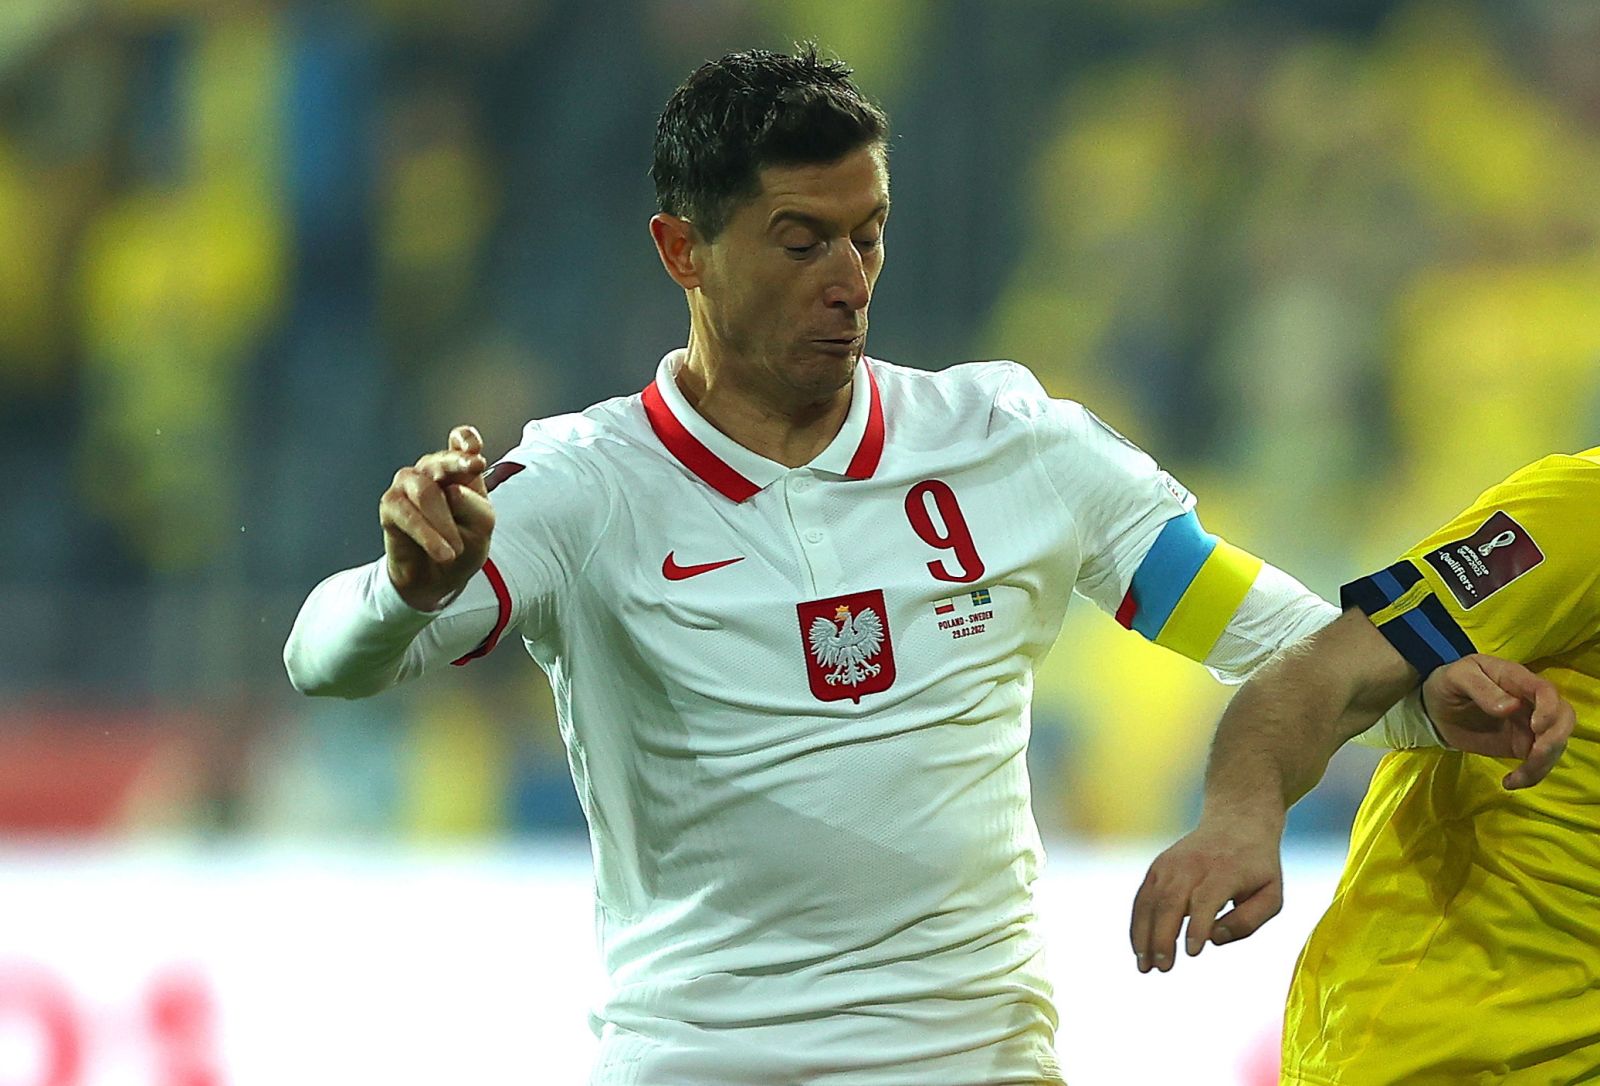 epa09859037 Poland's Robert Lewandowski (L) in action against Sweden's Jesper Karlstrom (R) during the FIFA World Cup 2022 playoff qualifying soccer match between Poland and Sweden in Chorzow, Poland, 29 March 2022.  EPA/LUKASZ GAGULSKI POLAND OUT